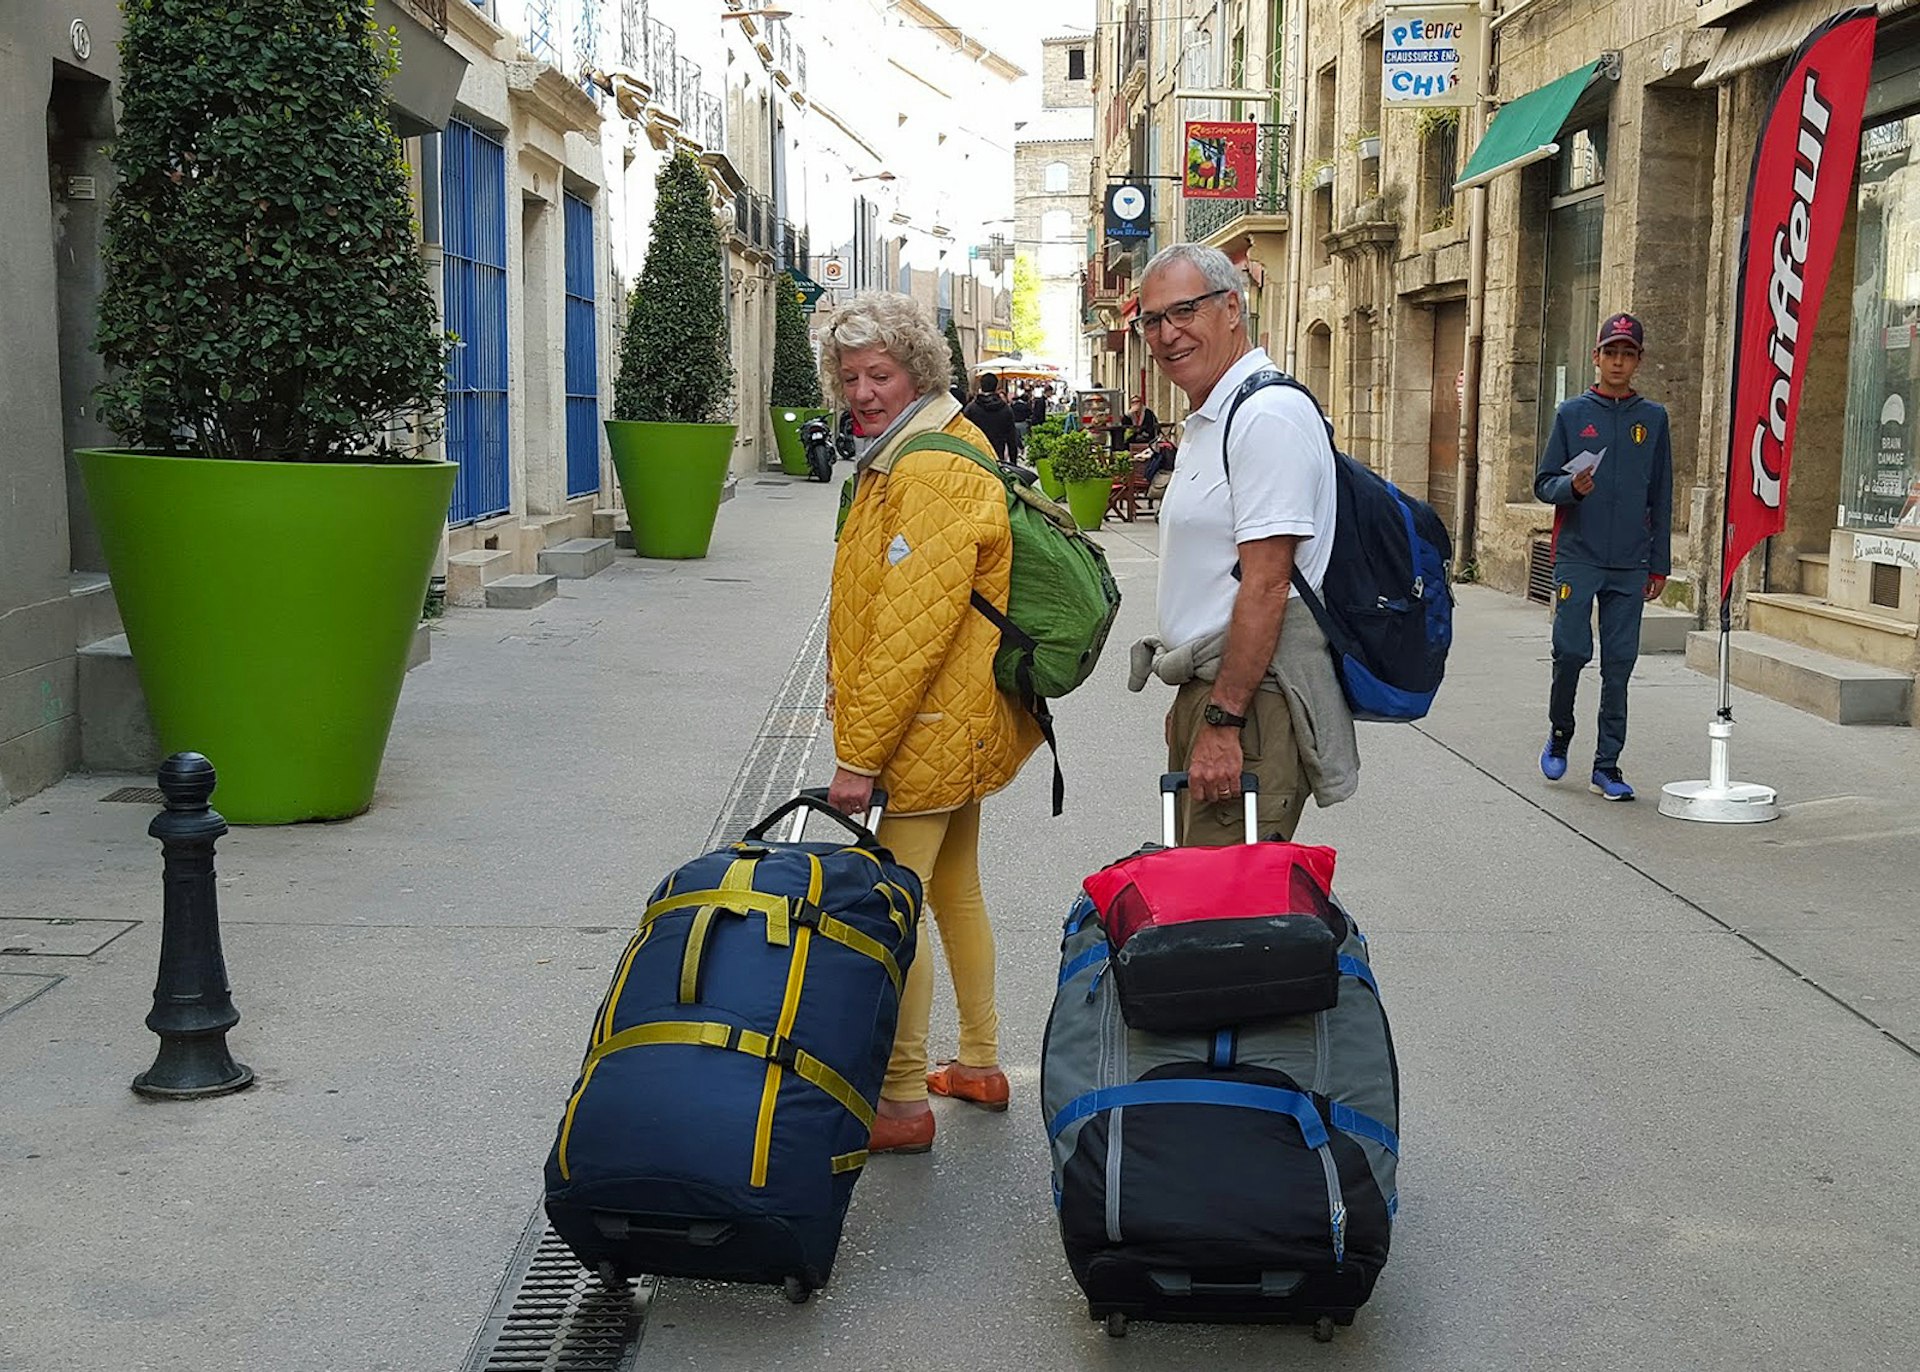 No end in sight: the Campbells on the move in Pézenas, France © Debbie and Michael Campbell